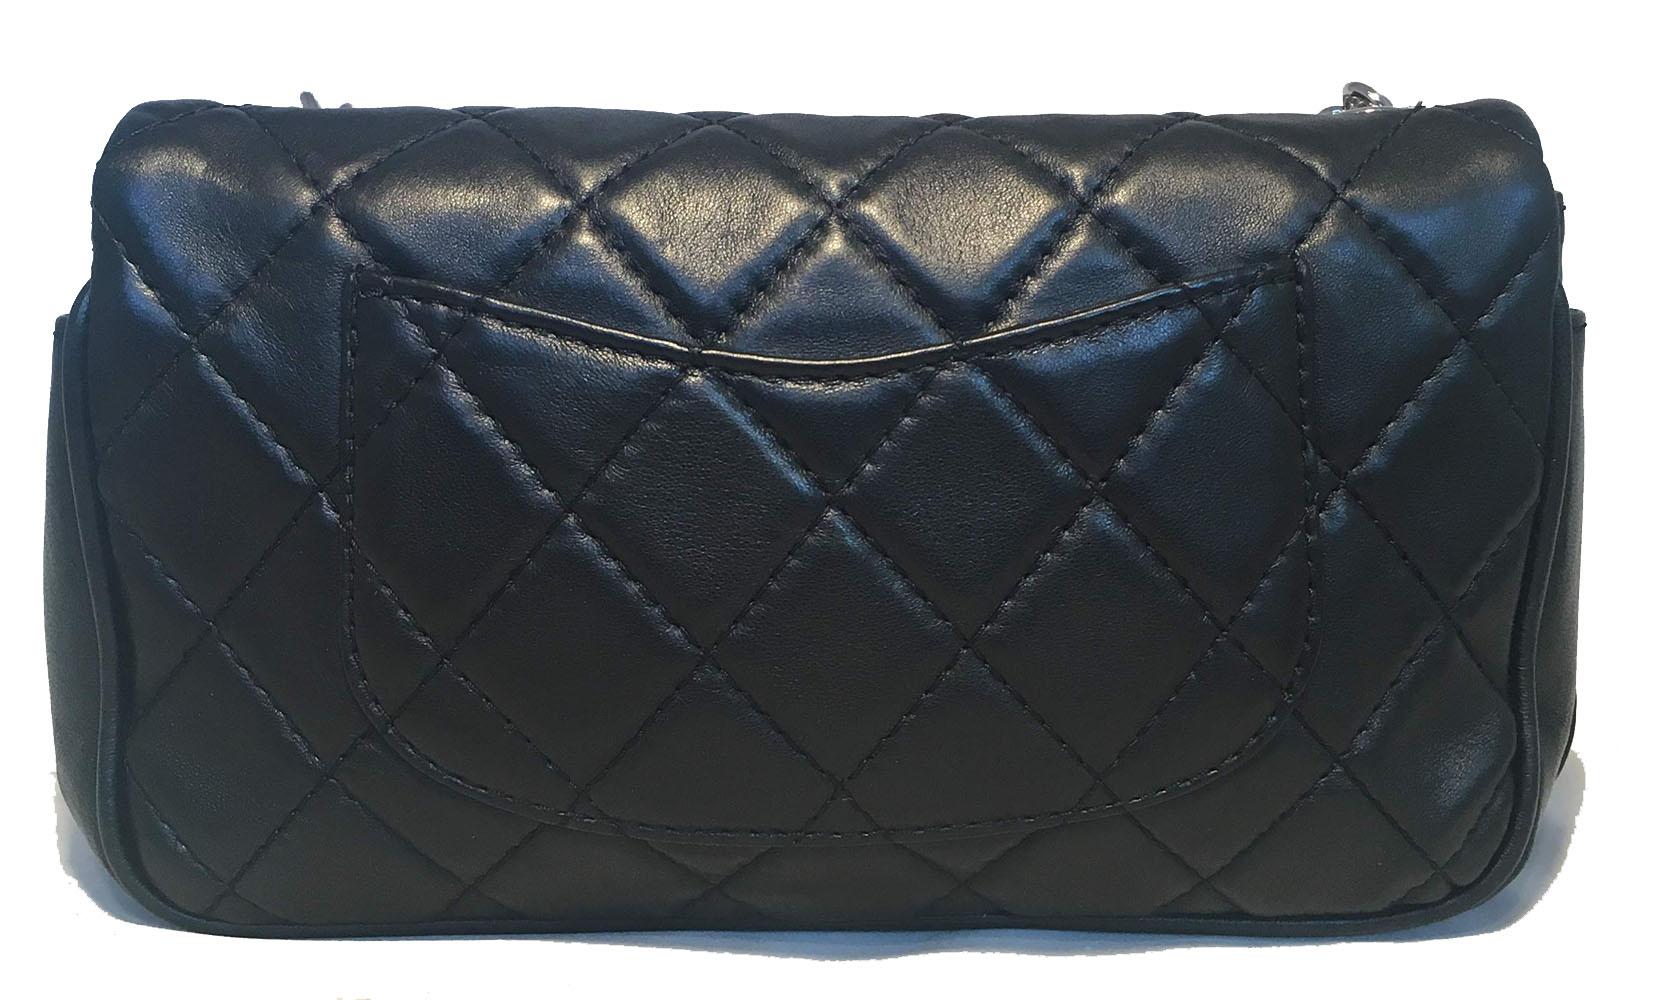 Women's or Men's Chanel Black Leather 10inch Classic Flap with Chain Strap Shoulder Bag